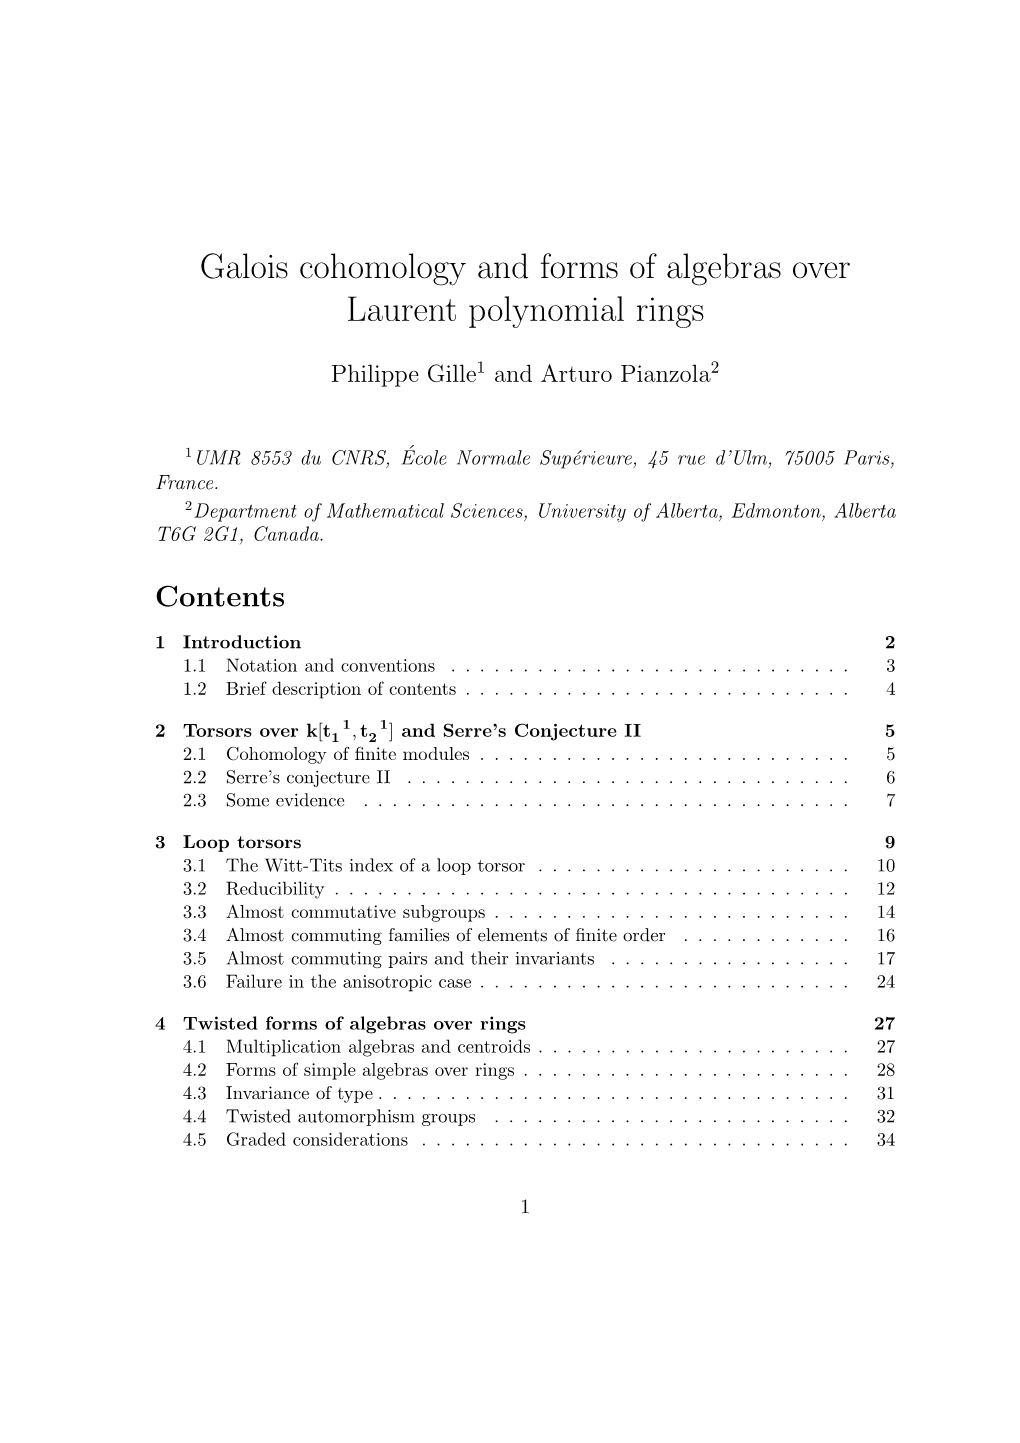 Galois Cohomology and Forms of Algebras Over Laurent Polynomial Rings